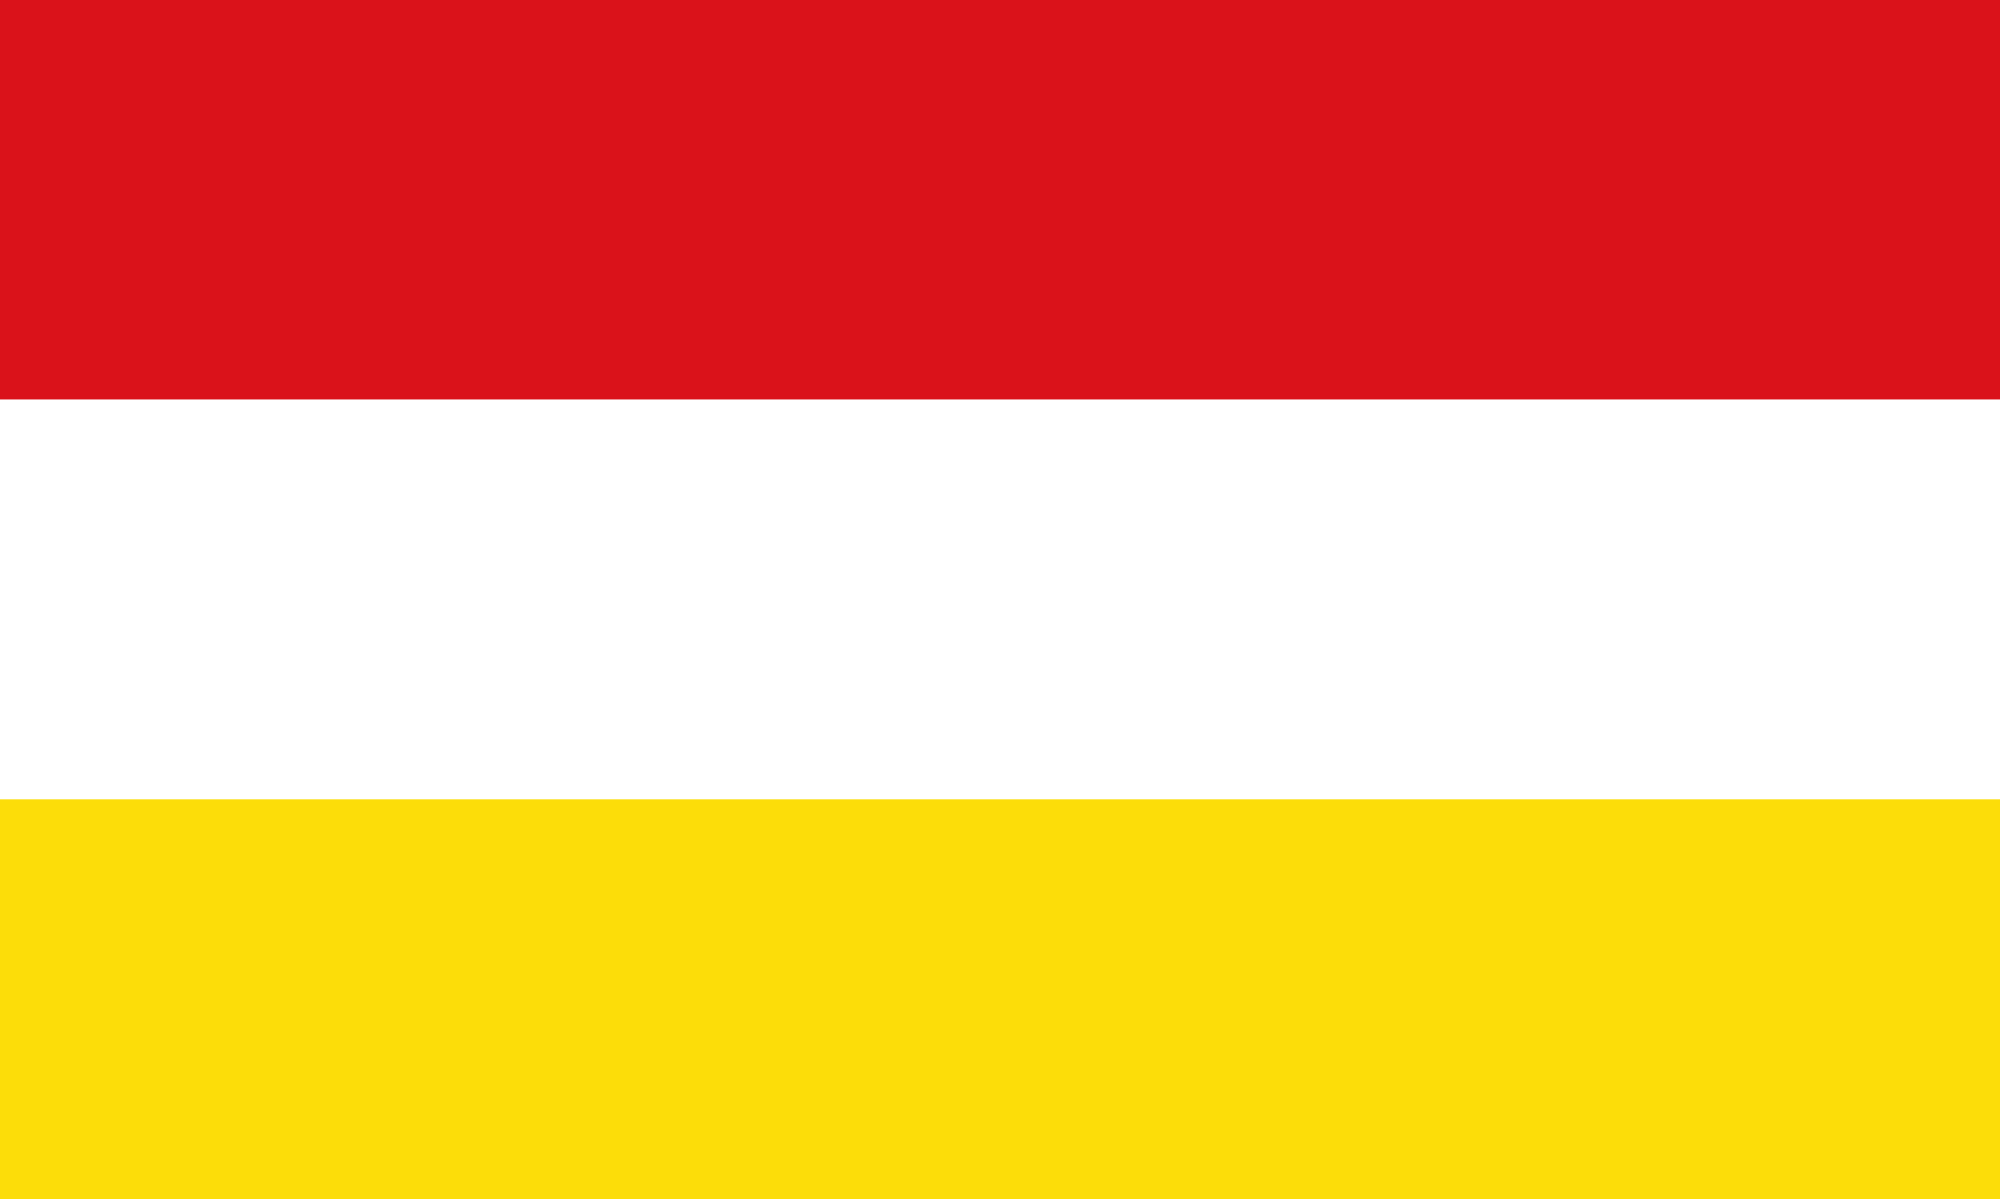 Red White Yellow Logo - File:Flag red white yellow 5x3.svg - Wikimedia Commons